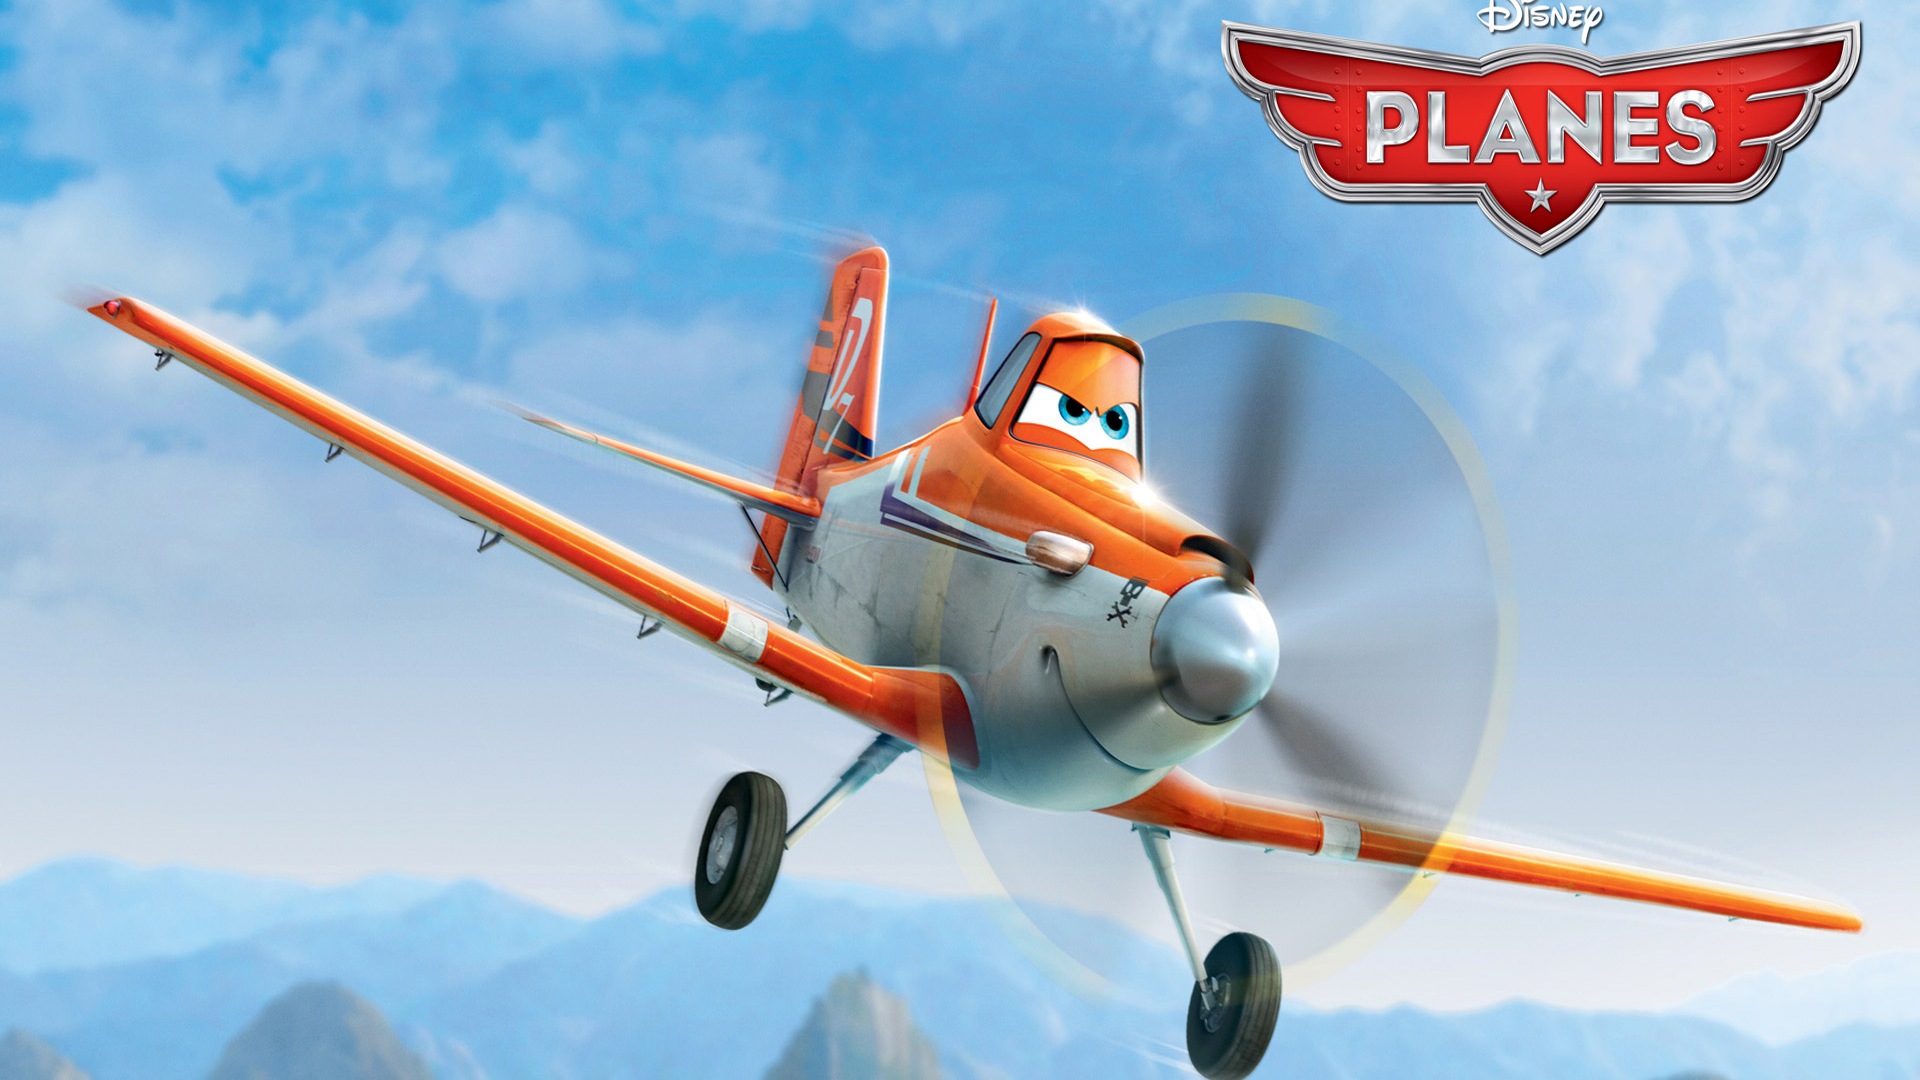 Planes 2013 HD wallpapers #15 - 1920x1080